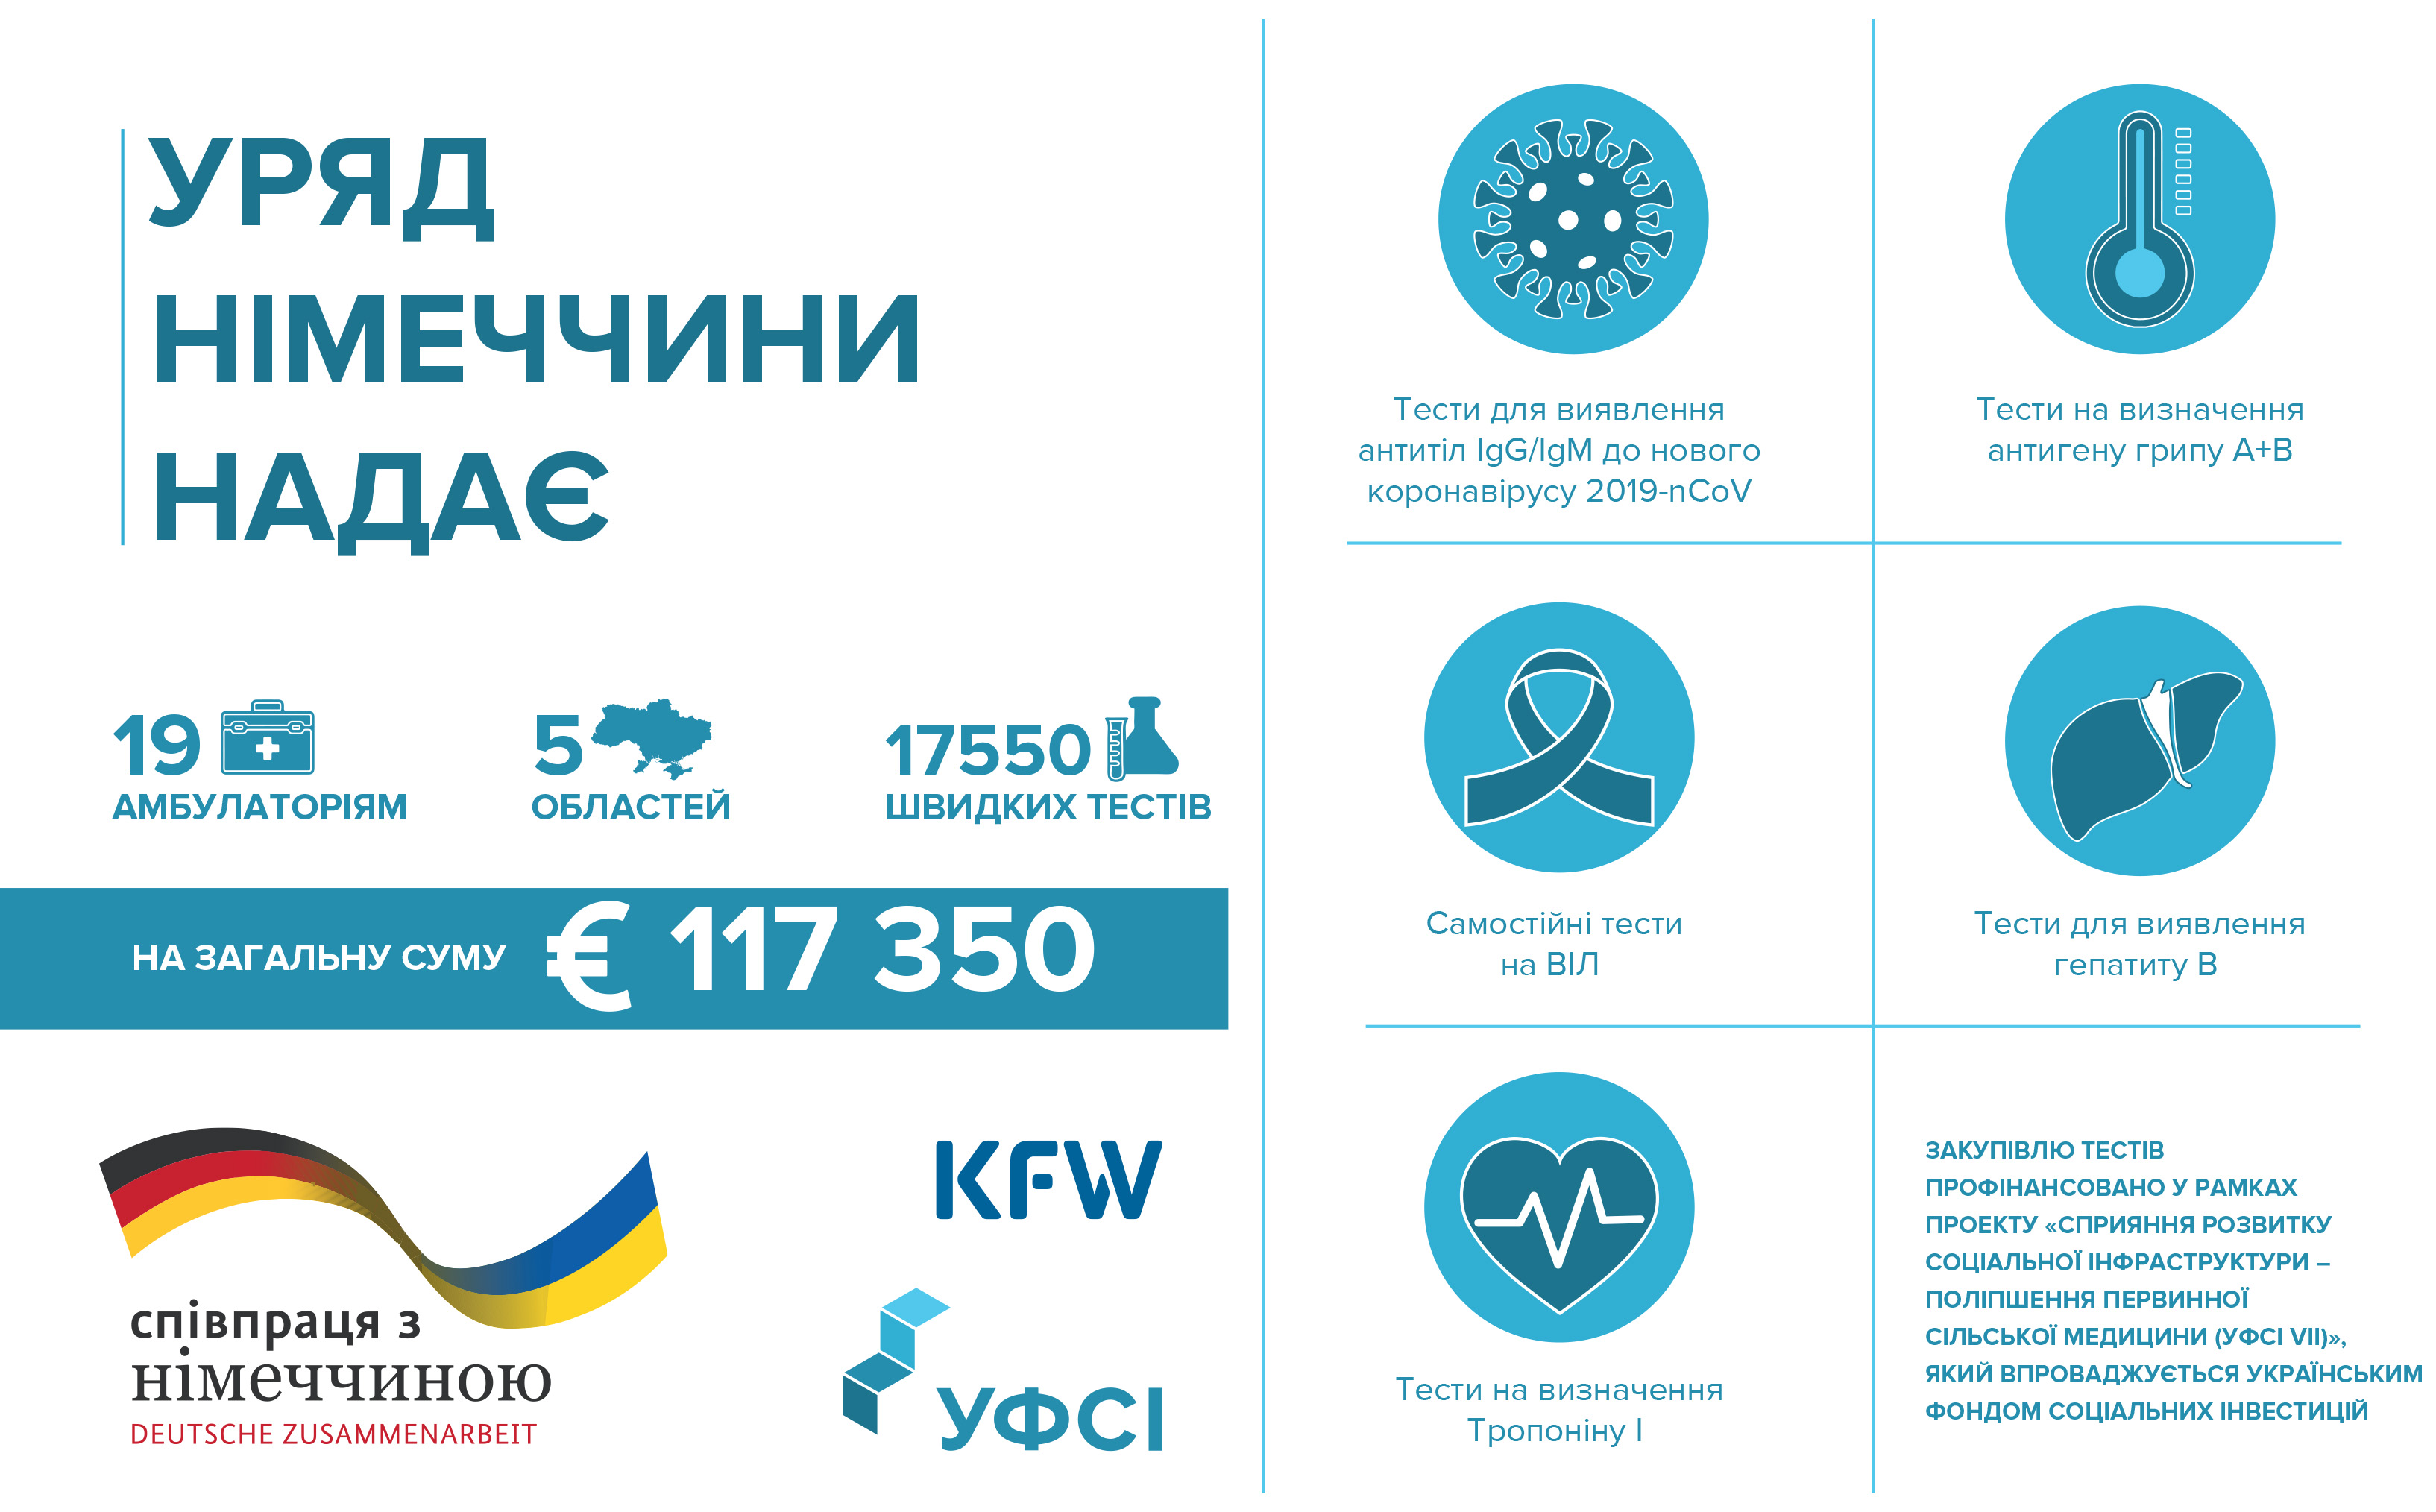 Rapid tests were purchased for some of the partner outpatient clinics under USIF VII Project